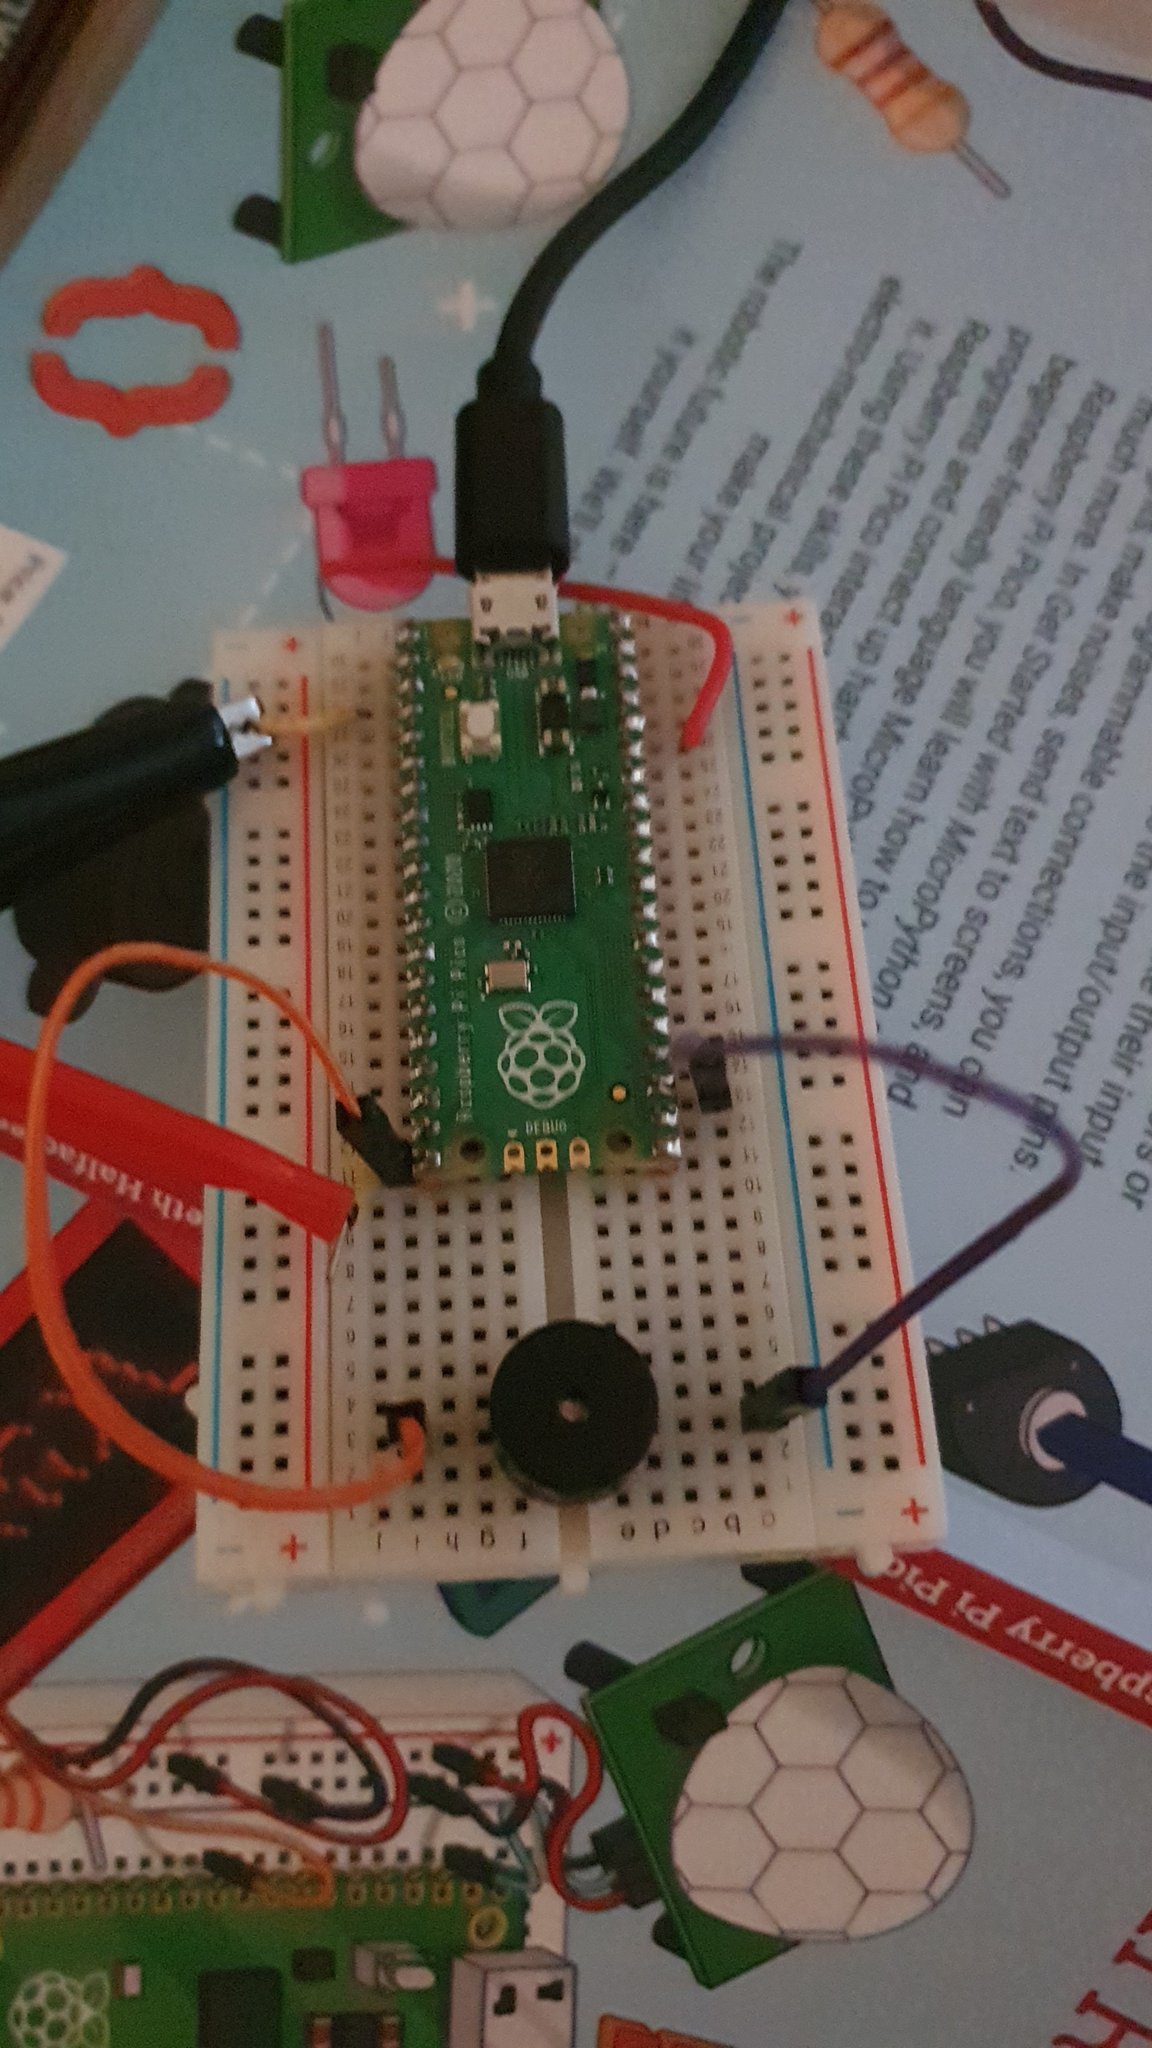 Raspberry Pi With Speaker and Book